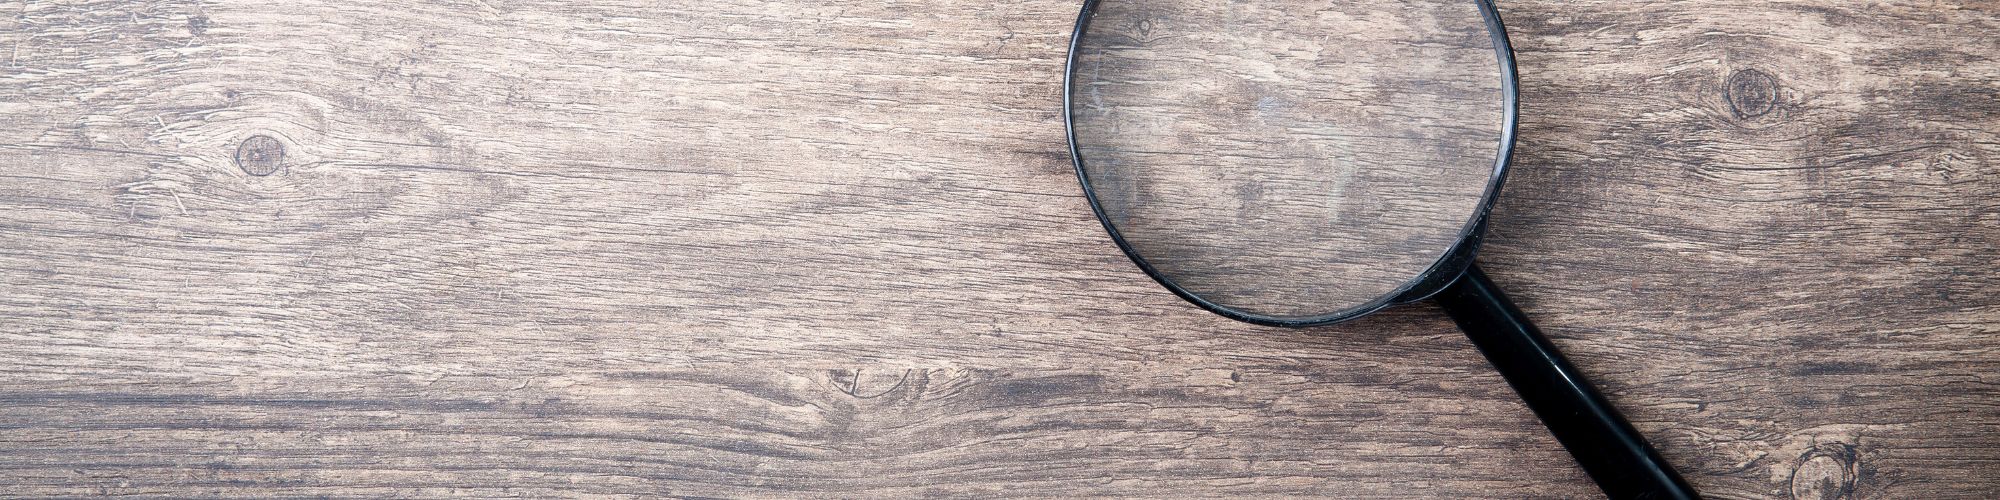 close up of a magnifying glass on a wooden background